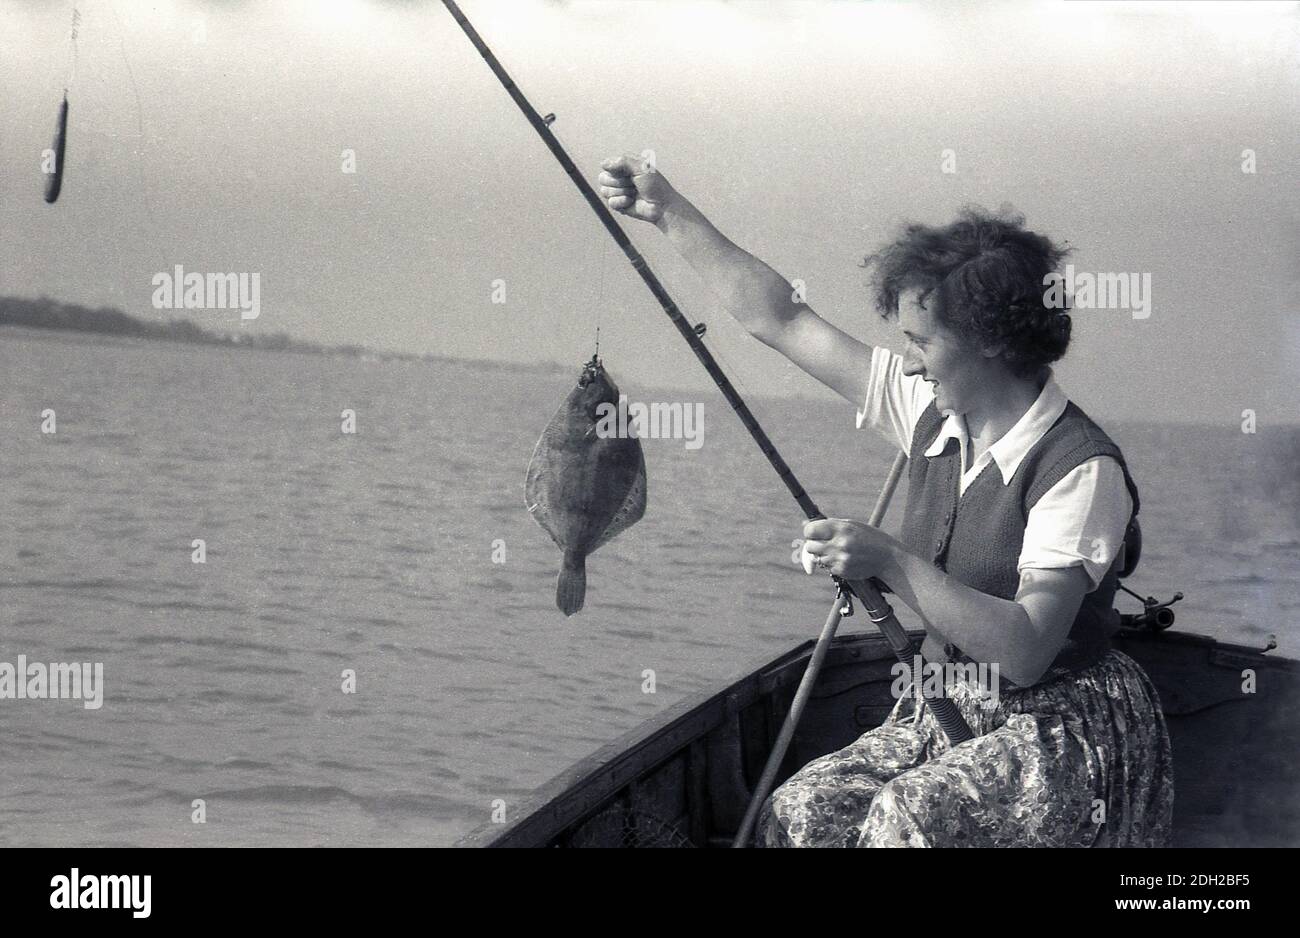 https://c8.alamy.com/comp/2DH2BF5/1950s-historical-out-at-sea-in-a-wooden-boat-a-lady-wearing-a-patterned-skirt-top-and-short-sleeve-woollen-cardigan-fishing-sitting-holding-a-fishing-rod-and-holding-up-her-catch-a-flat-fish-a-flounder-deal-kent-england-2DH2BF5.jpg